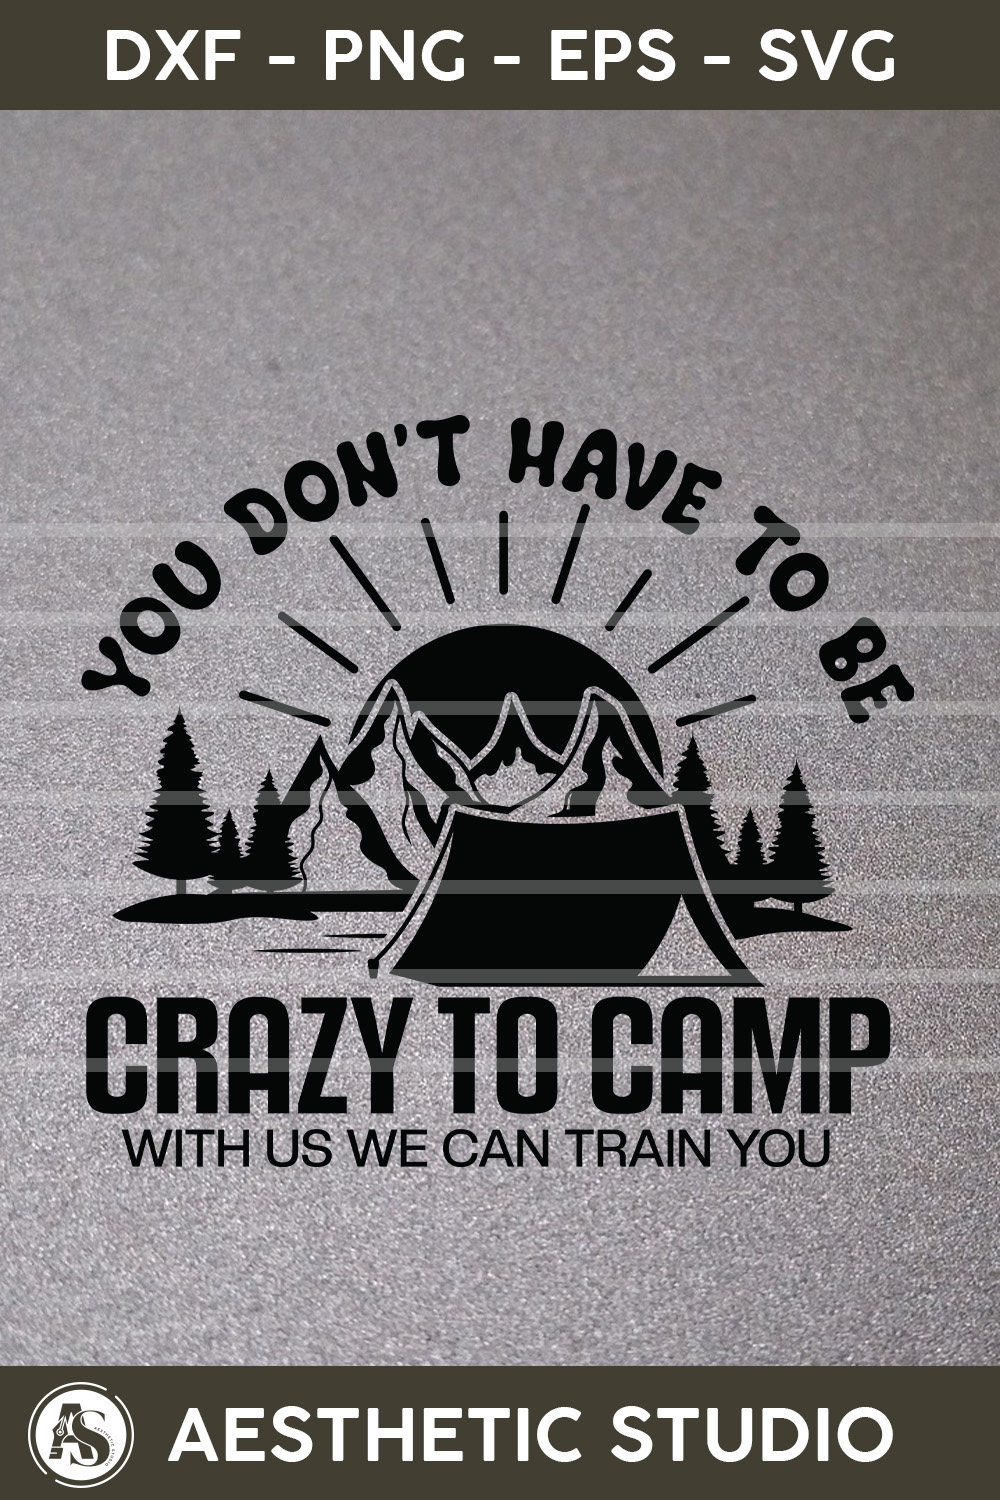 You Don't Have To Be Crazy To Camp With Us We Can Train You, Crazy Camping Friends, Camper, Adventure, Camp Life, Camping Svg, Typography, Camping Quotes, Camping Cut File, Funny Camping, Svg, Eps, Dxf, Png, Cut file pinterest preview image.